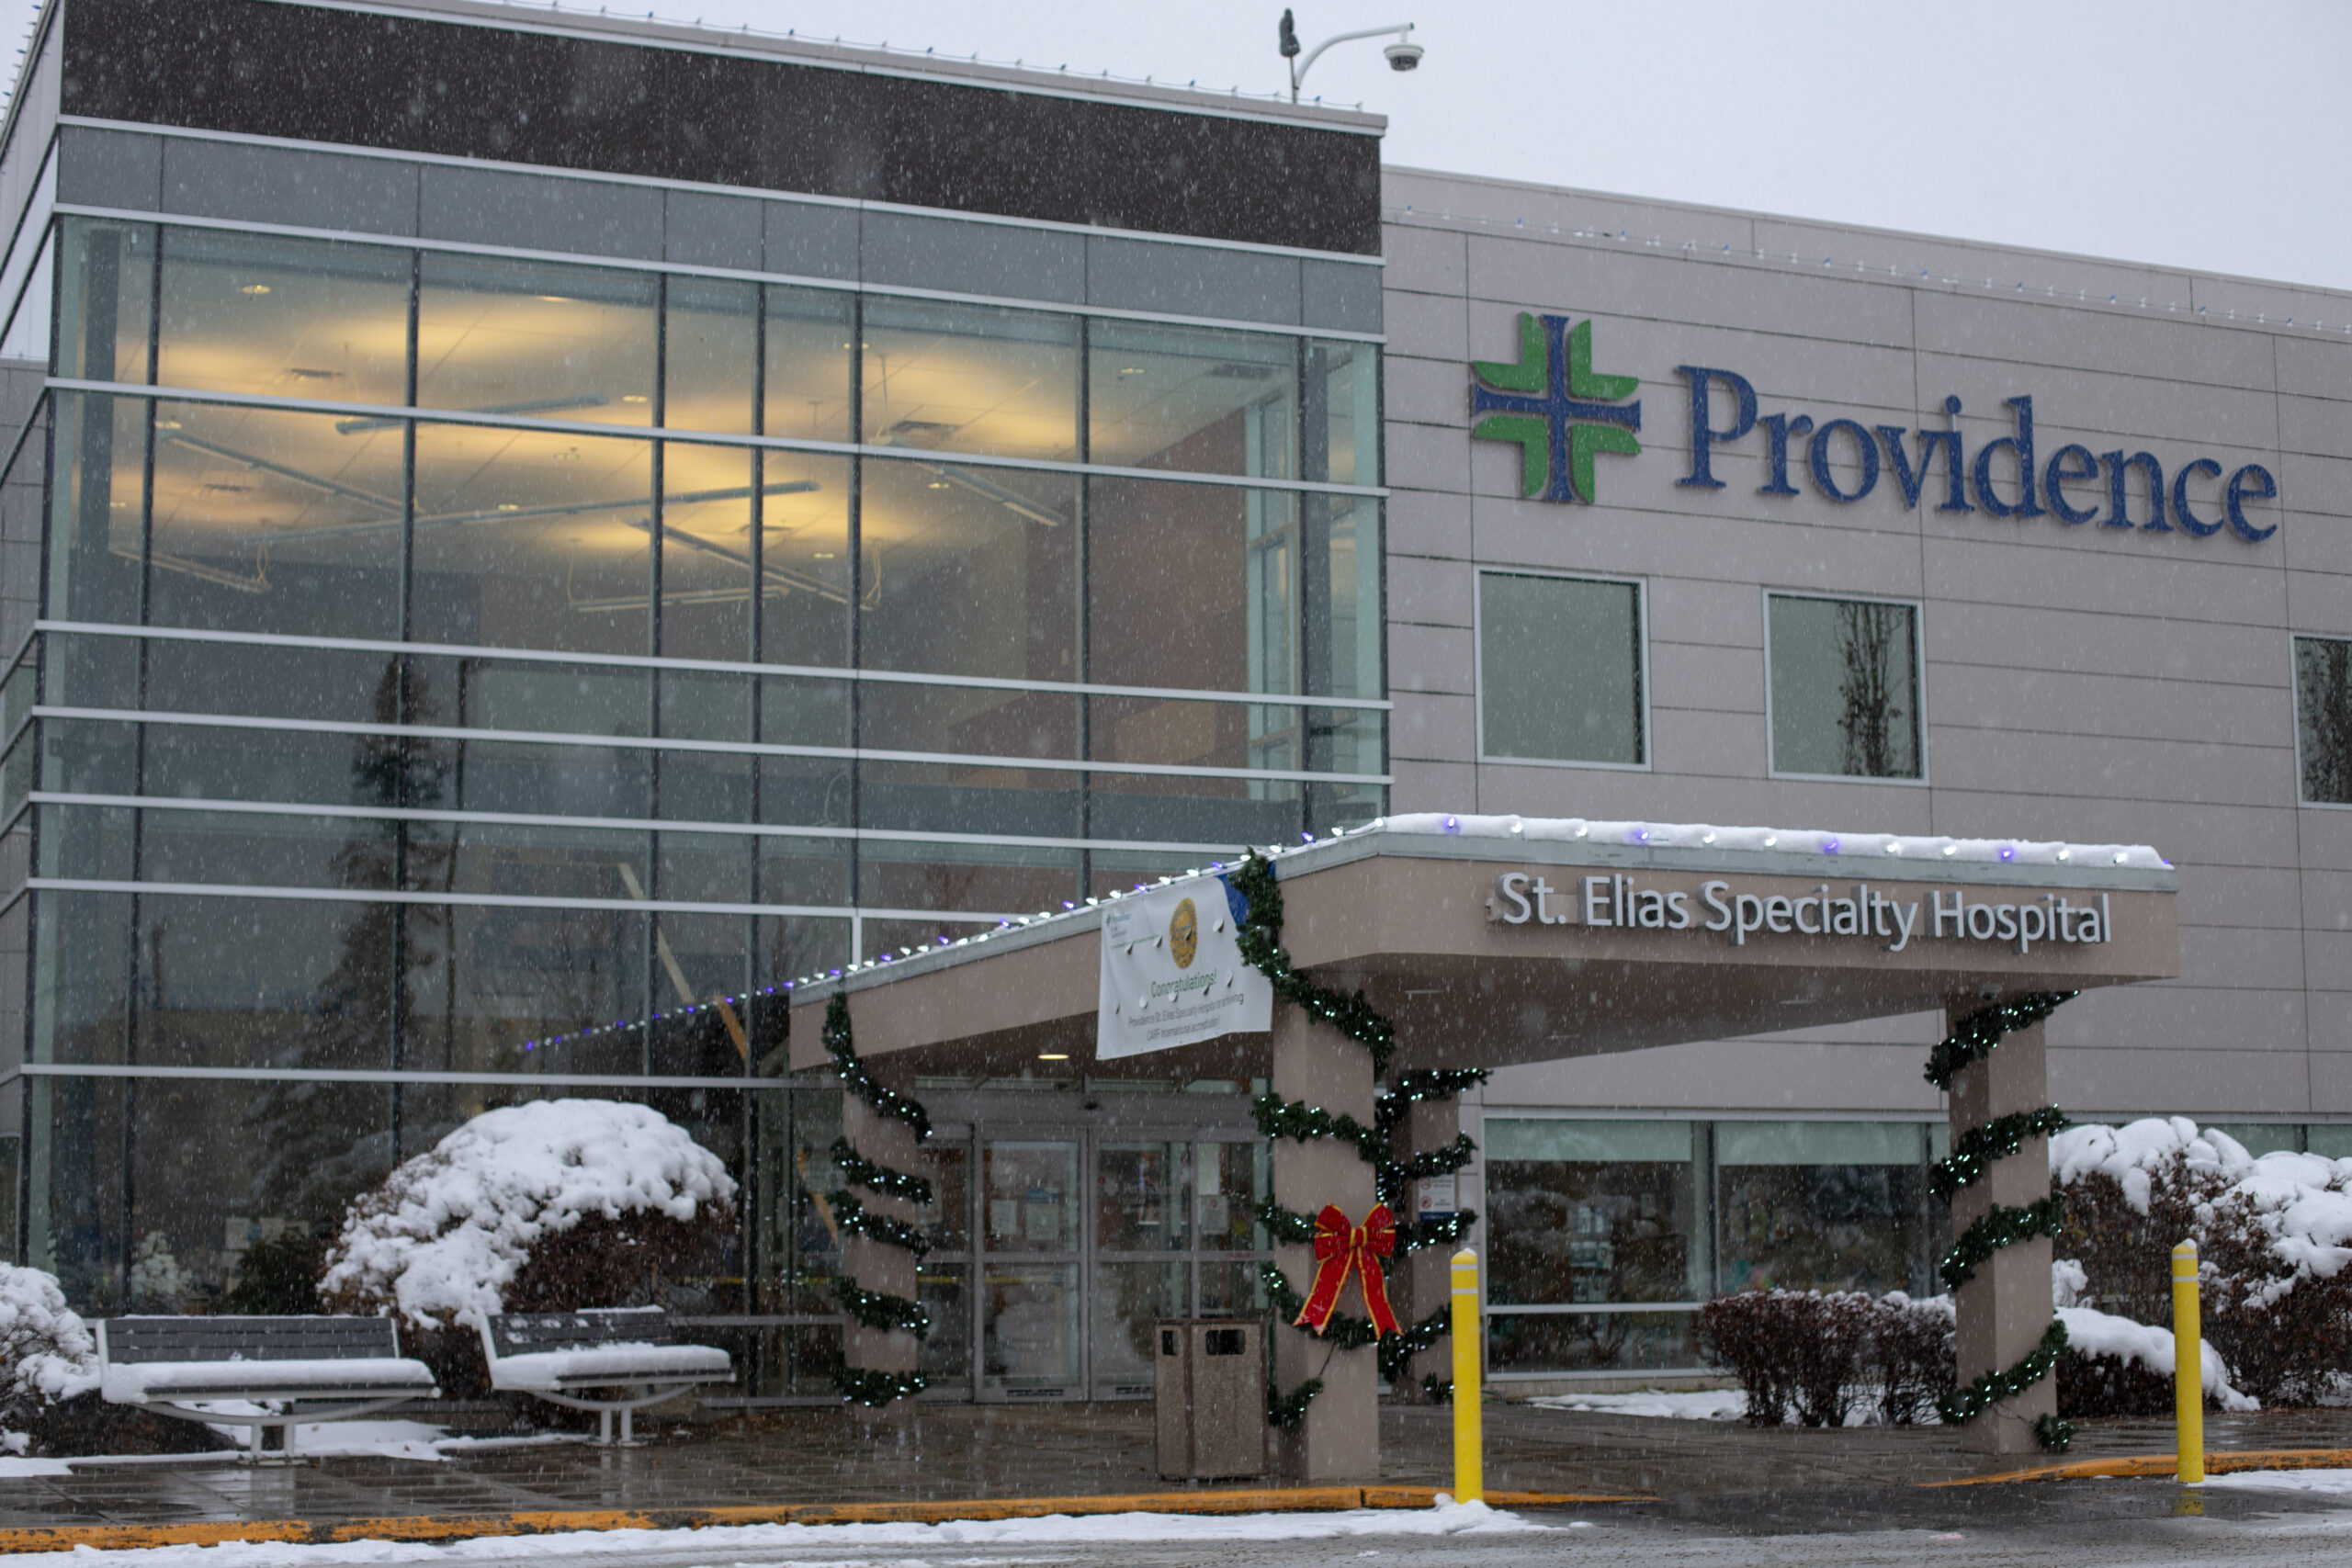 The front entrance of St. Elias Specialty Hospital in Anchorage displays holiday decorations on a snowy afternoon.